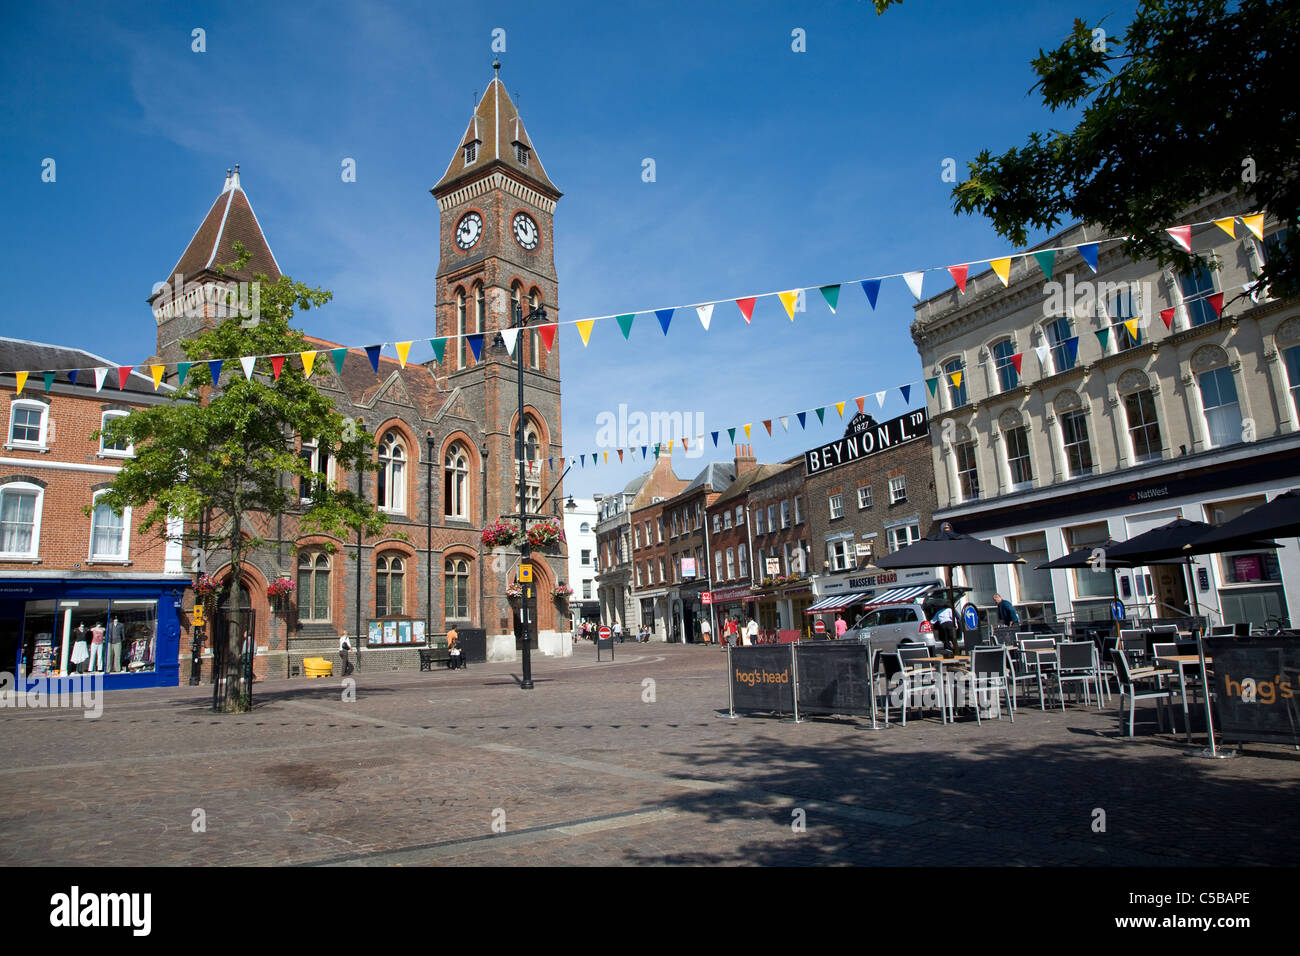 The Town hall and historic buildings in the market square, Newbury, Berkshire, England Stock Photo